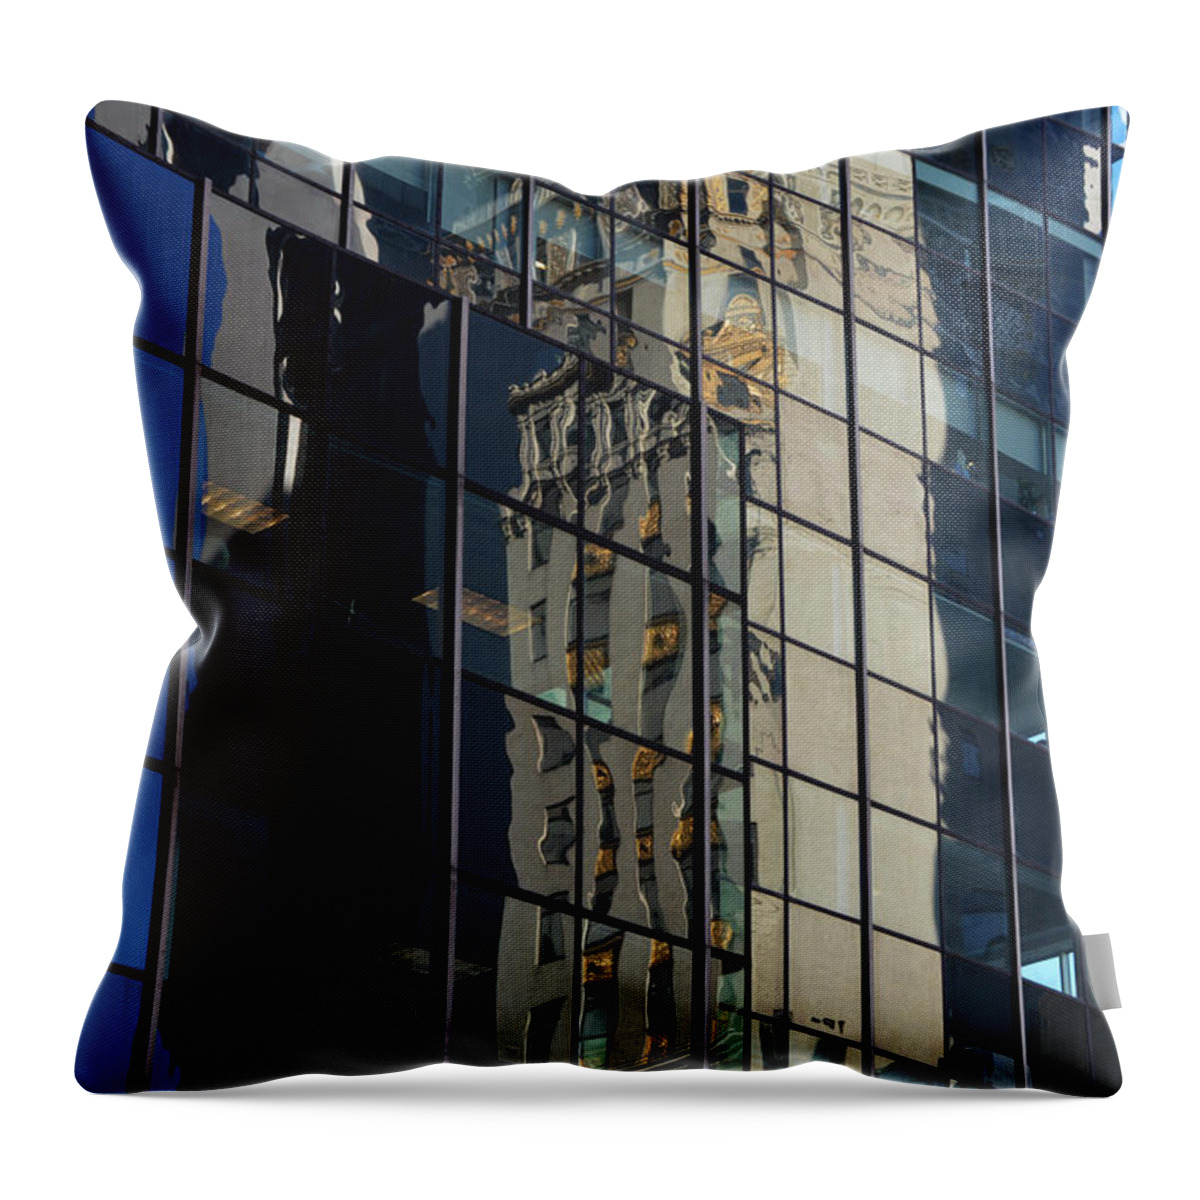 Reflection Throw Pillow featuring the photograph Mirror Image by Lynellen Nielsen